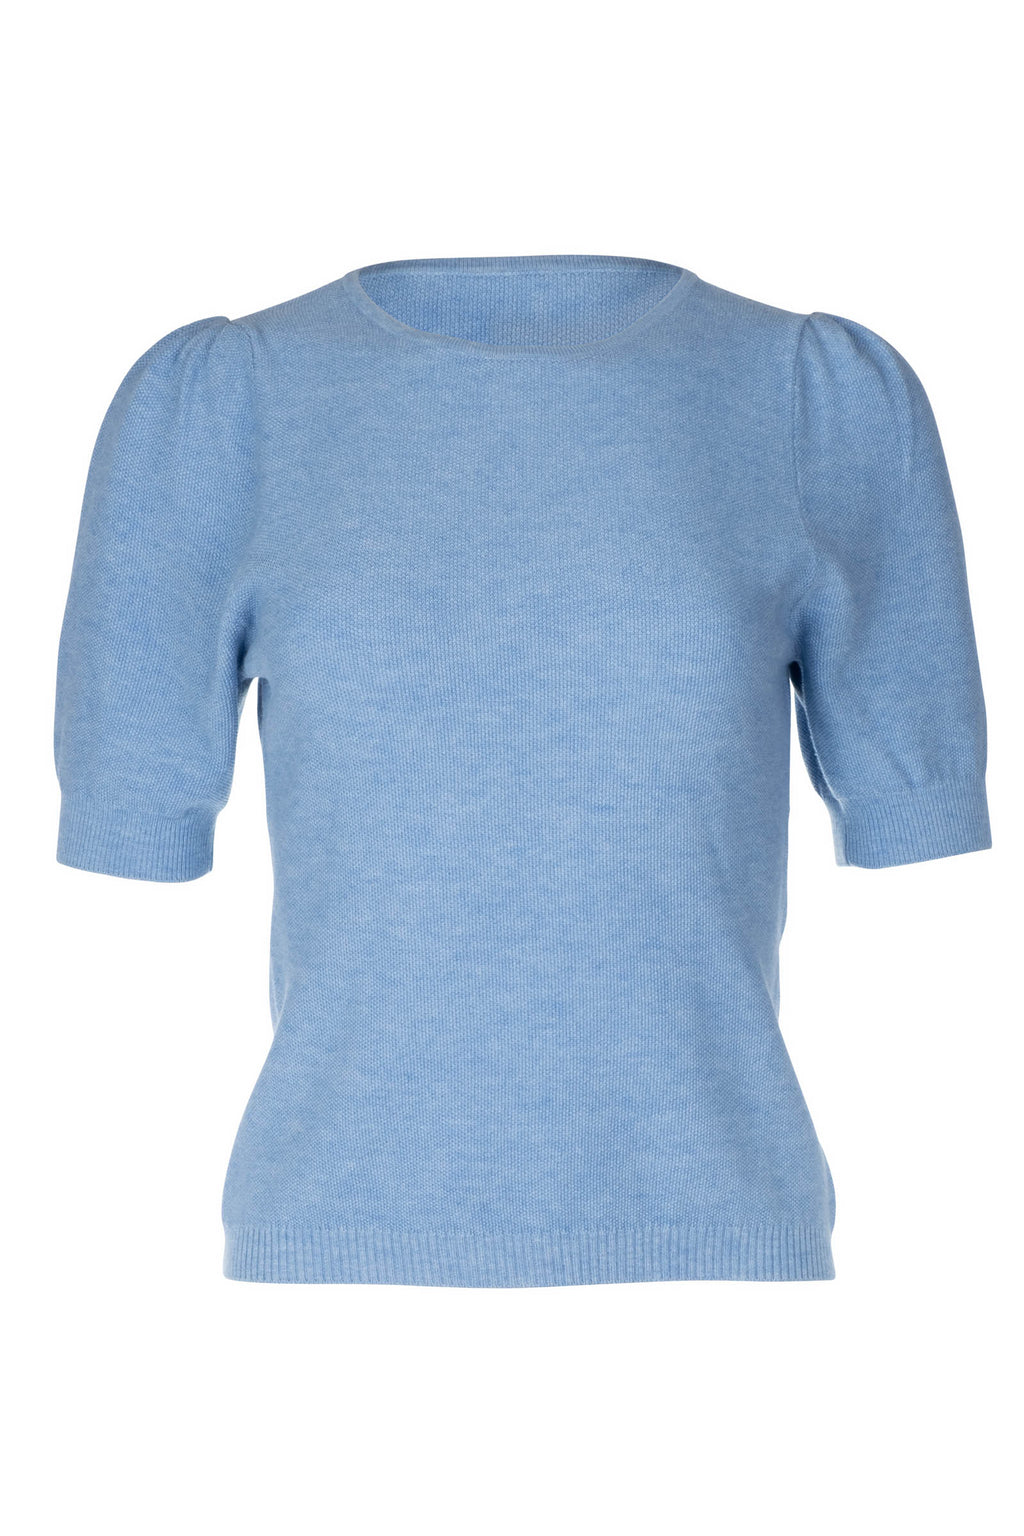 Ruched Sleeve Sweater - Tidal Wave